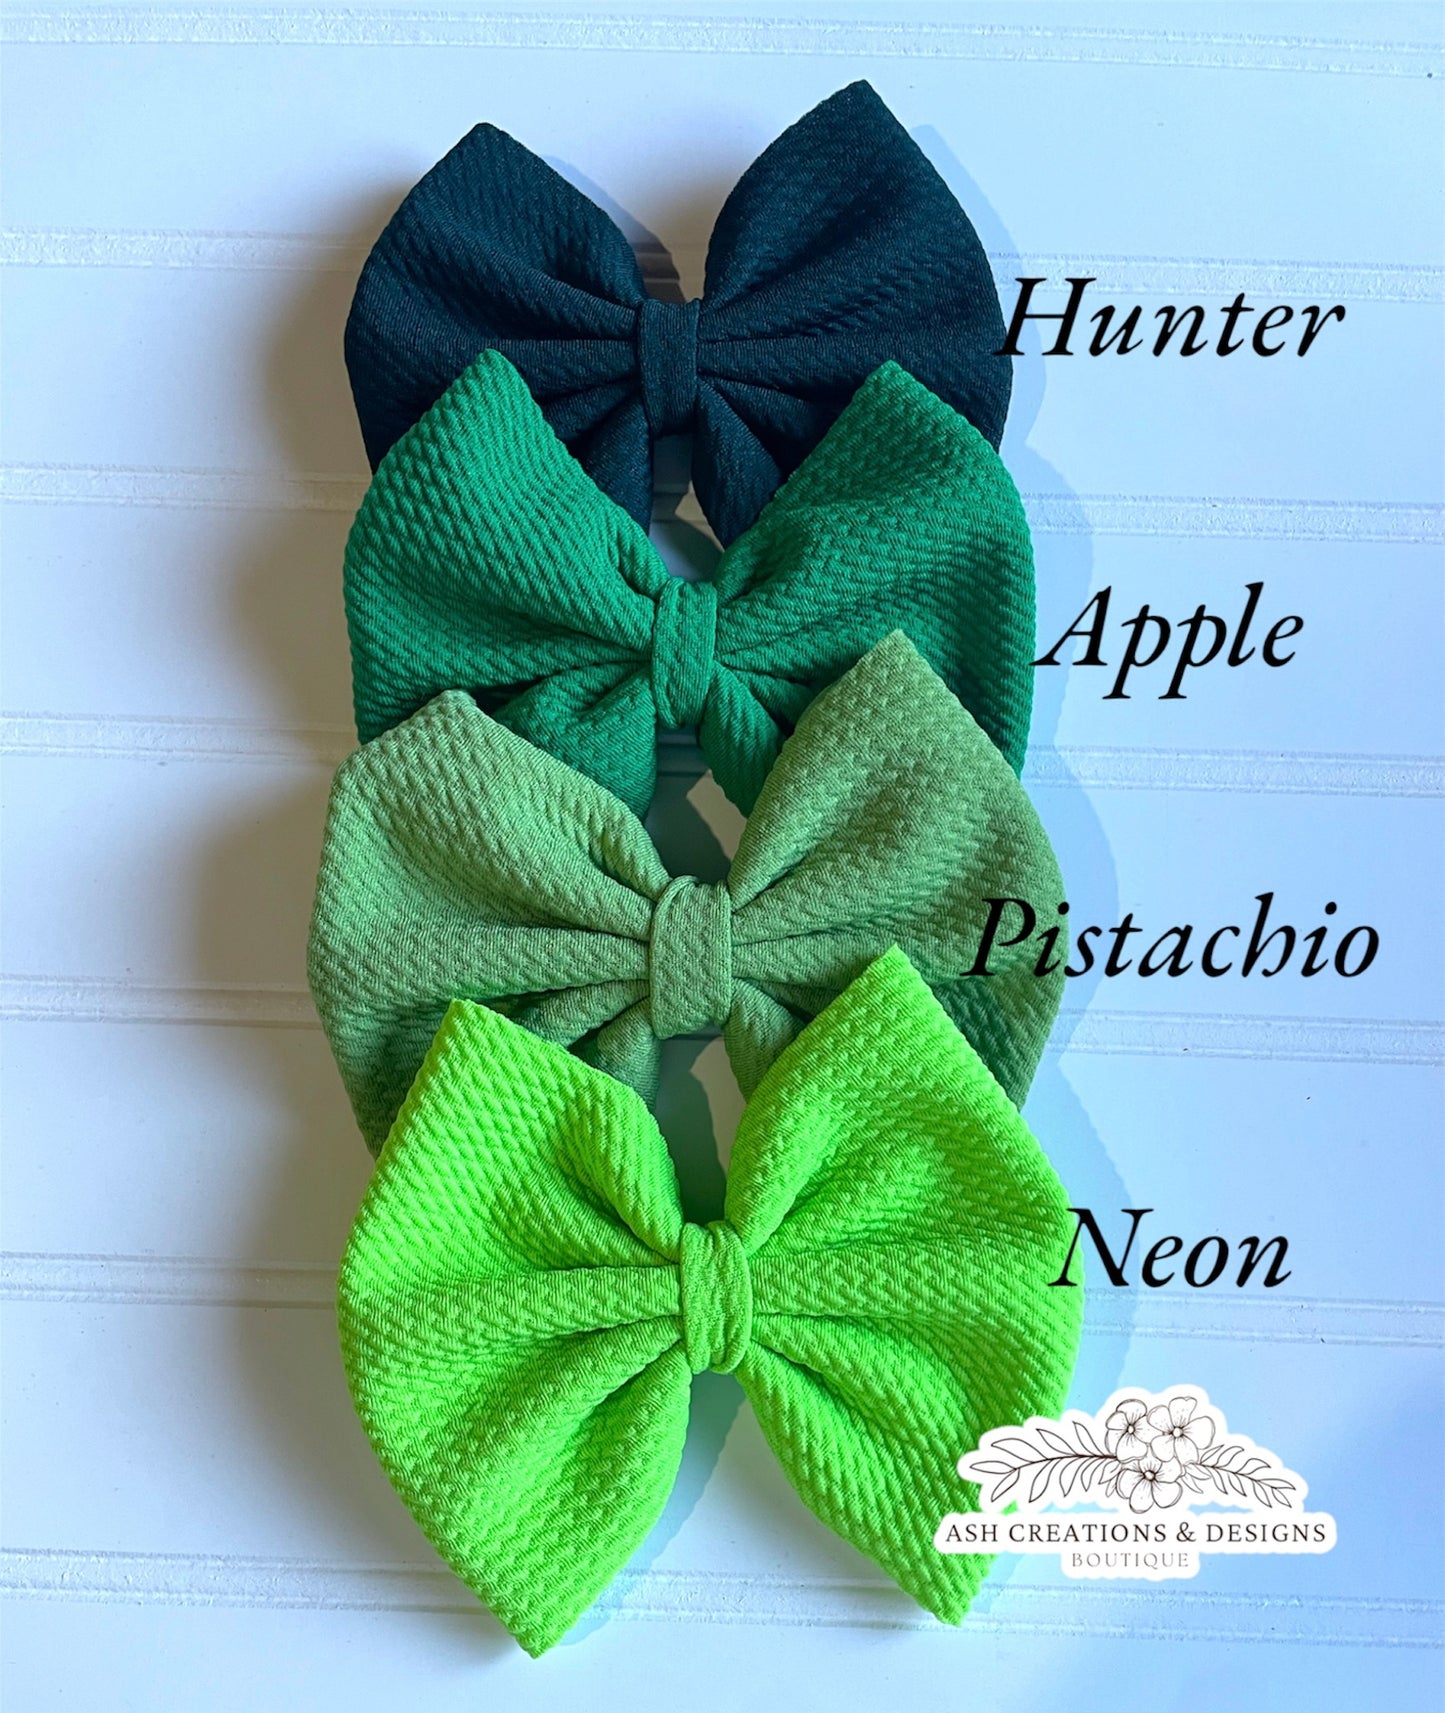 Whole sale Bows (Solids Only) Mystery Bundles